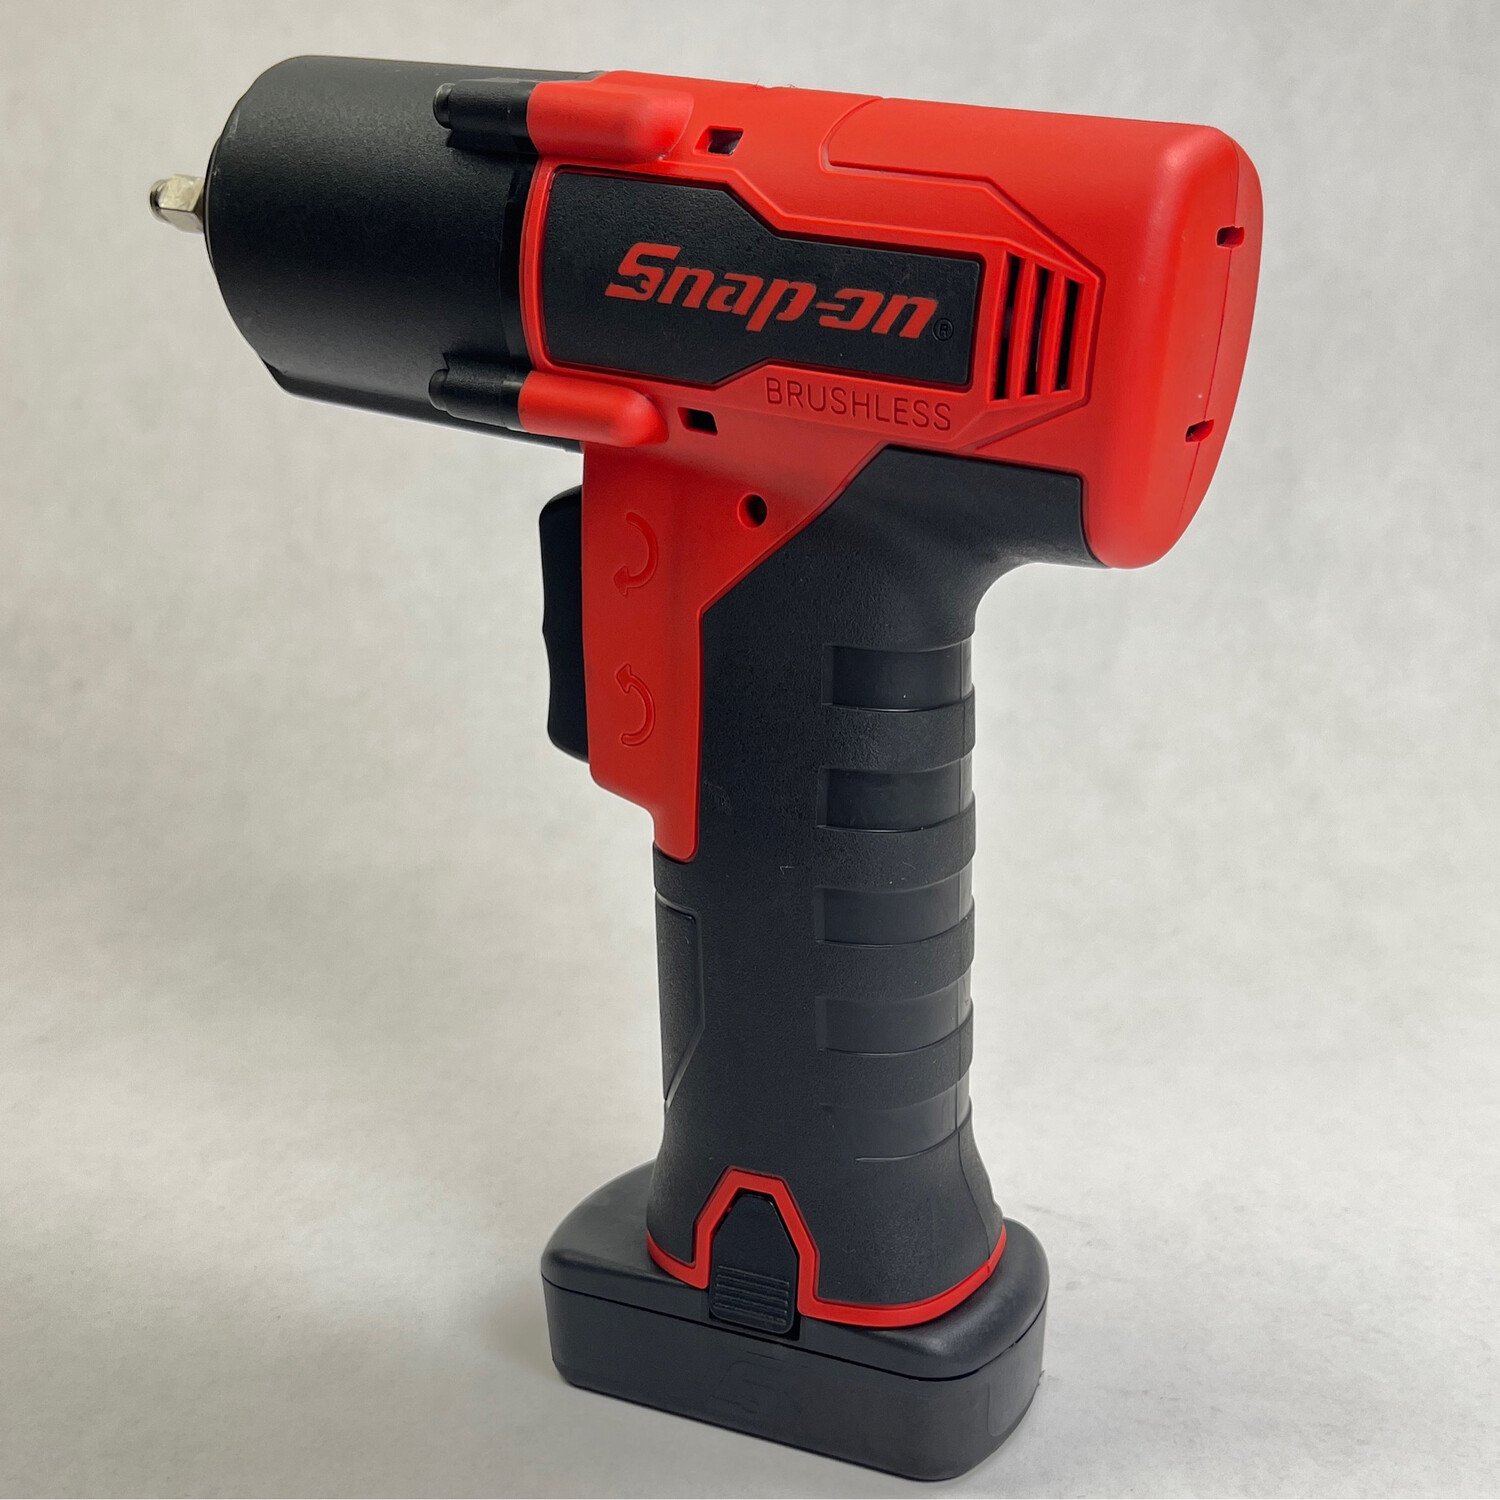 14.4 V 1/4 Drive MicroLithium Cordless Impact Wrench (Tool Only) (Red), CT825DB